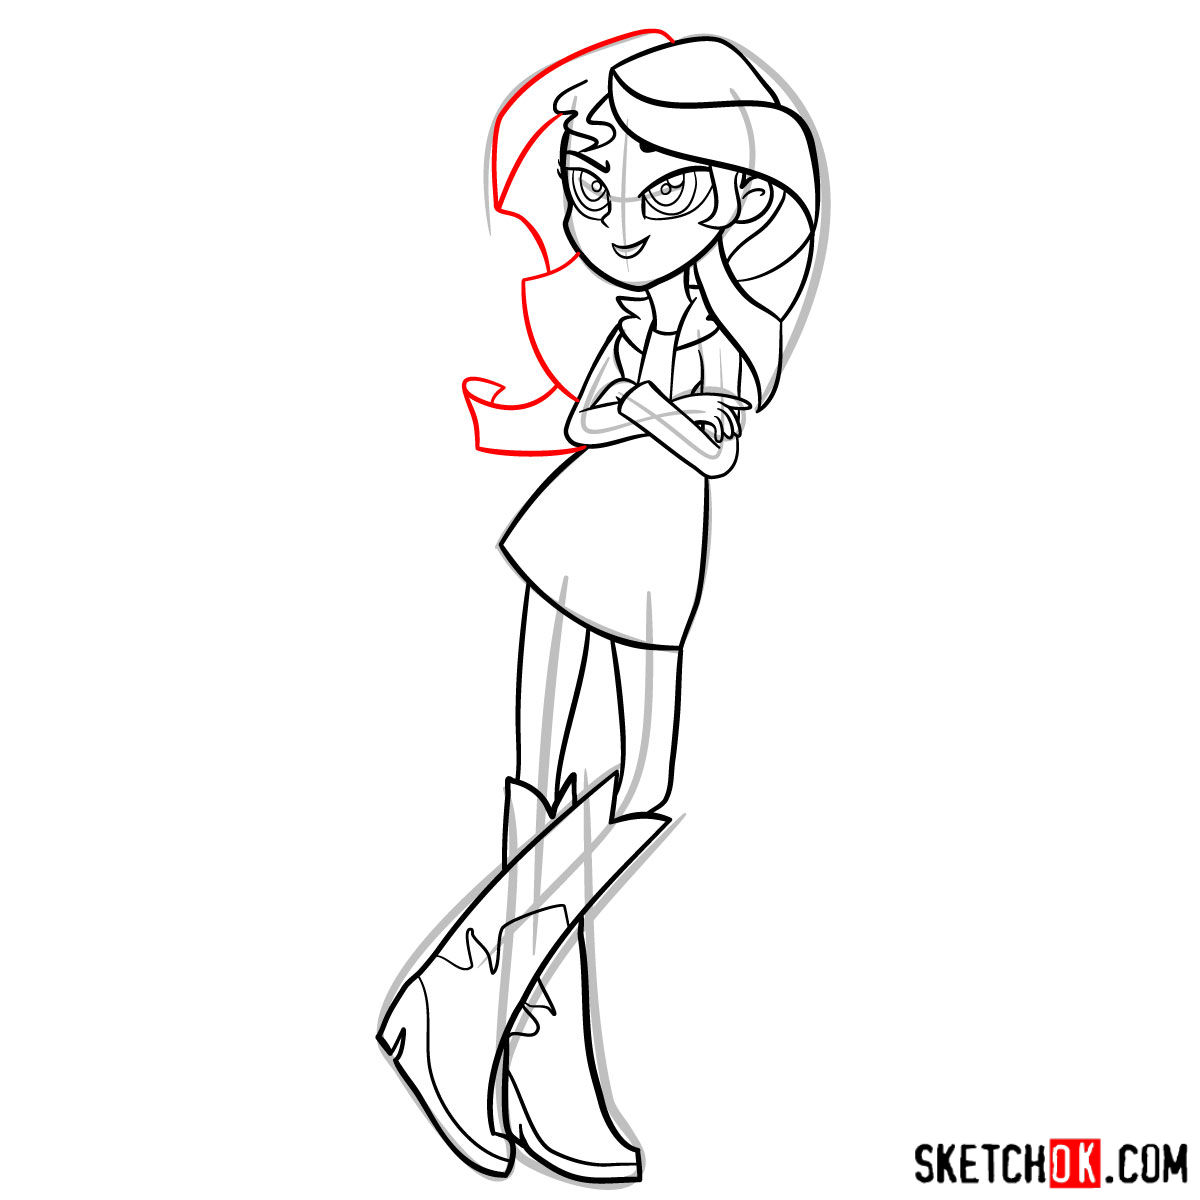 How to draw Sunset Shimmer - Equestria Girls - step 11